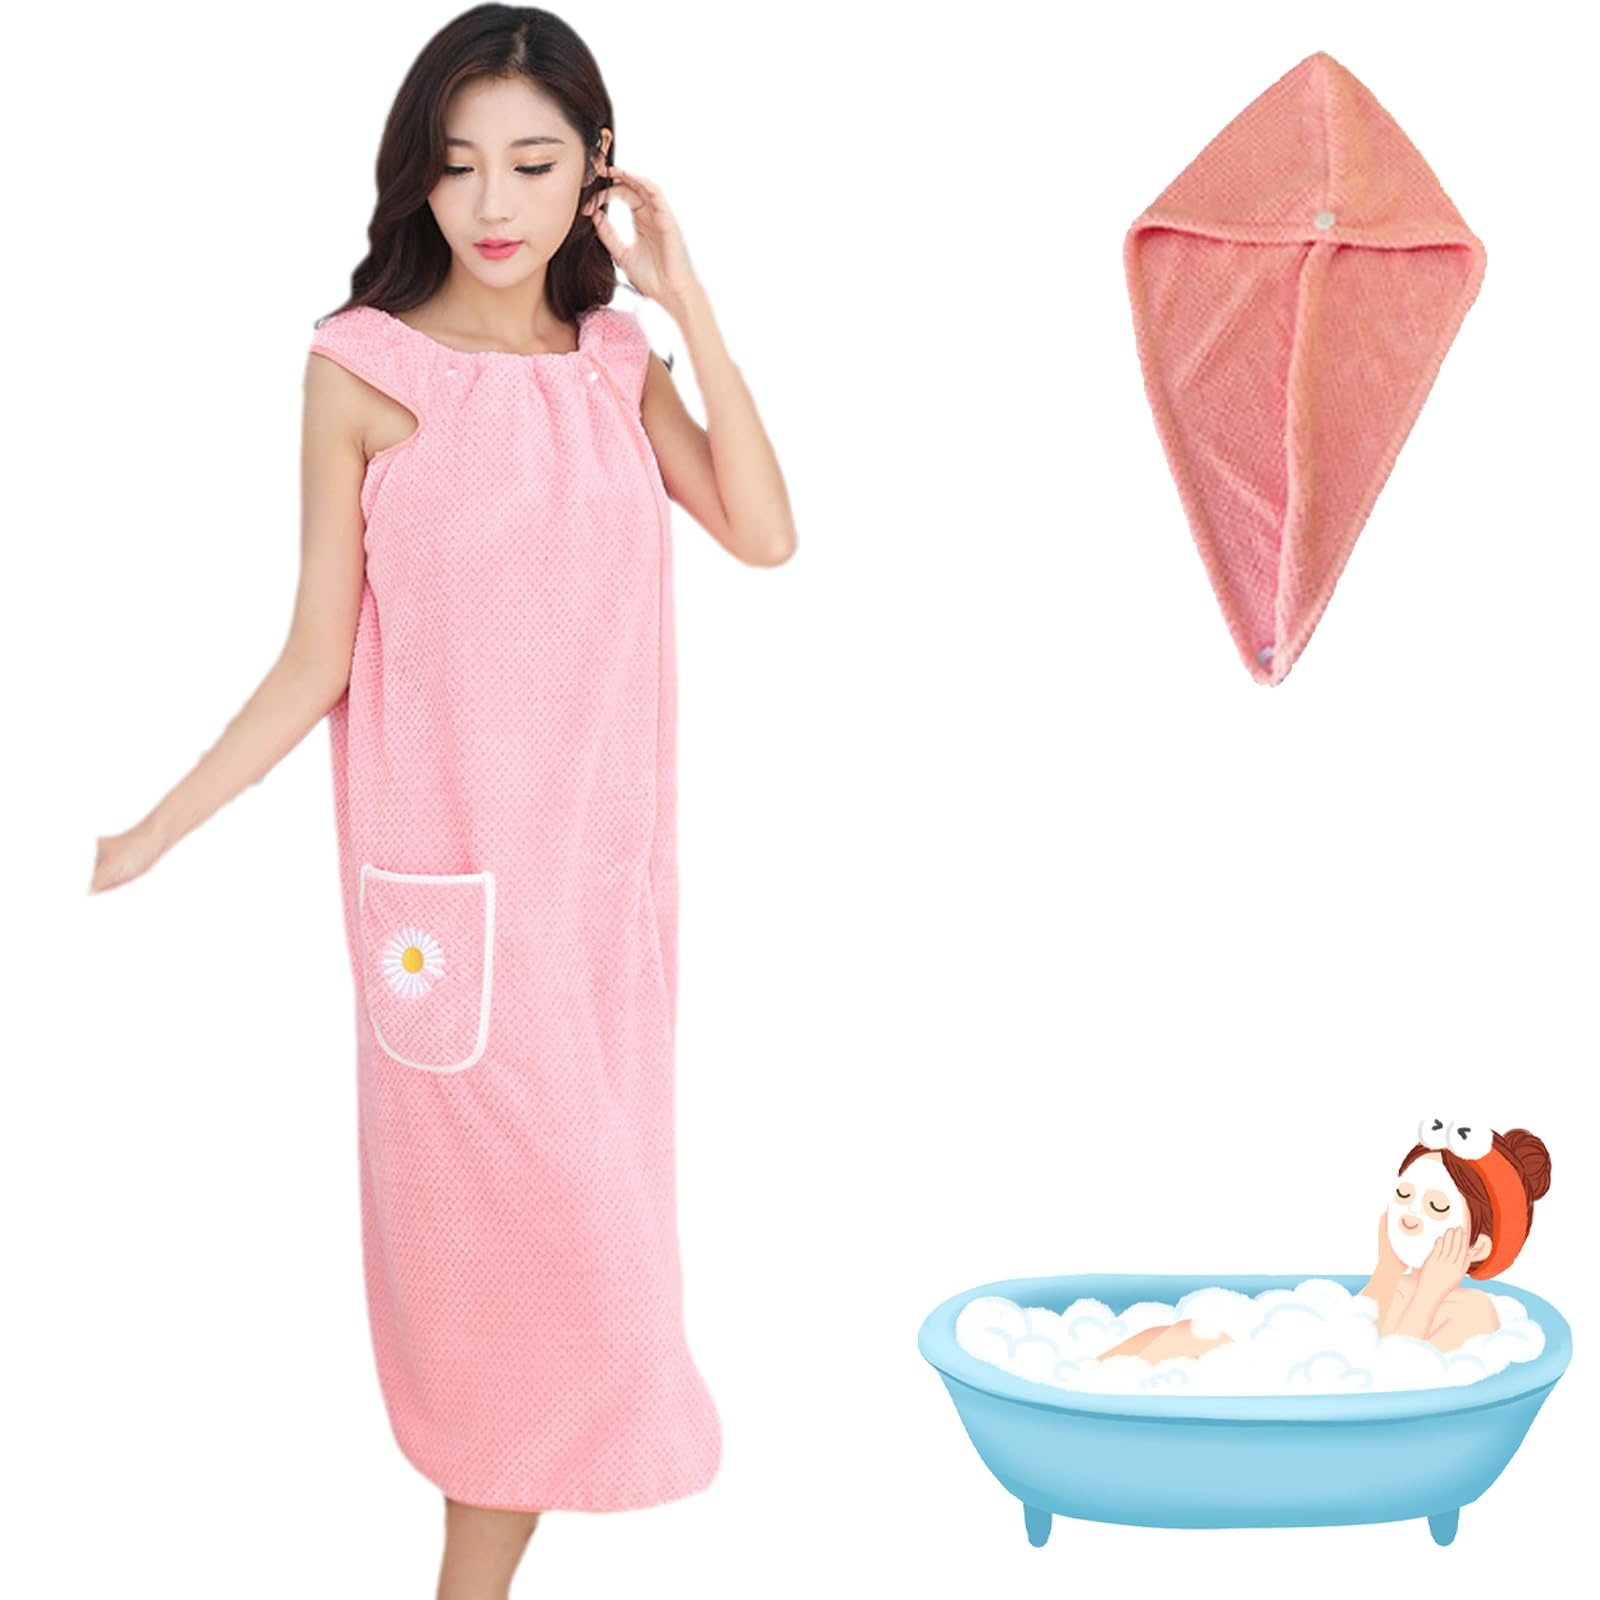 2023 Quick Dry Absorb Water Wearable Bath Towel,Wearable Bathrobes Shower Wrap Towel for Women (Pink,M (143~198 lbs))